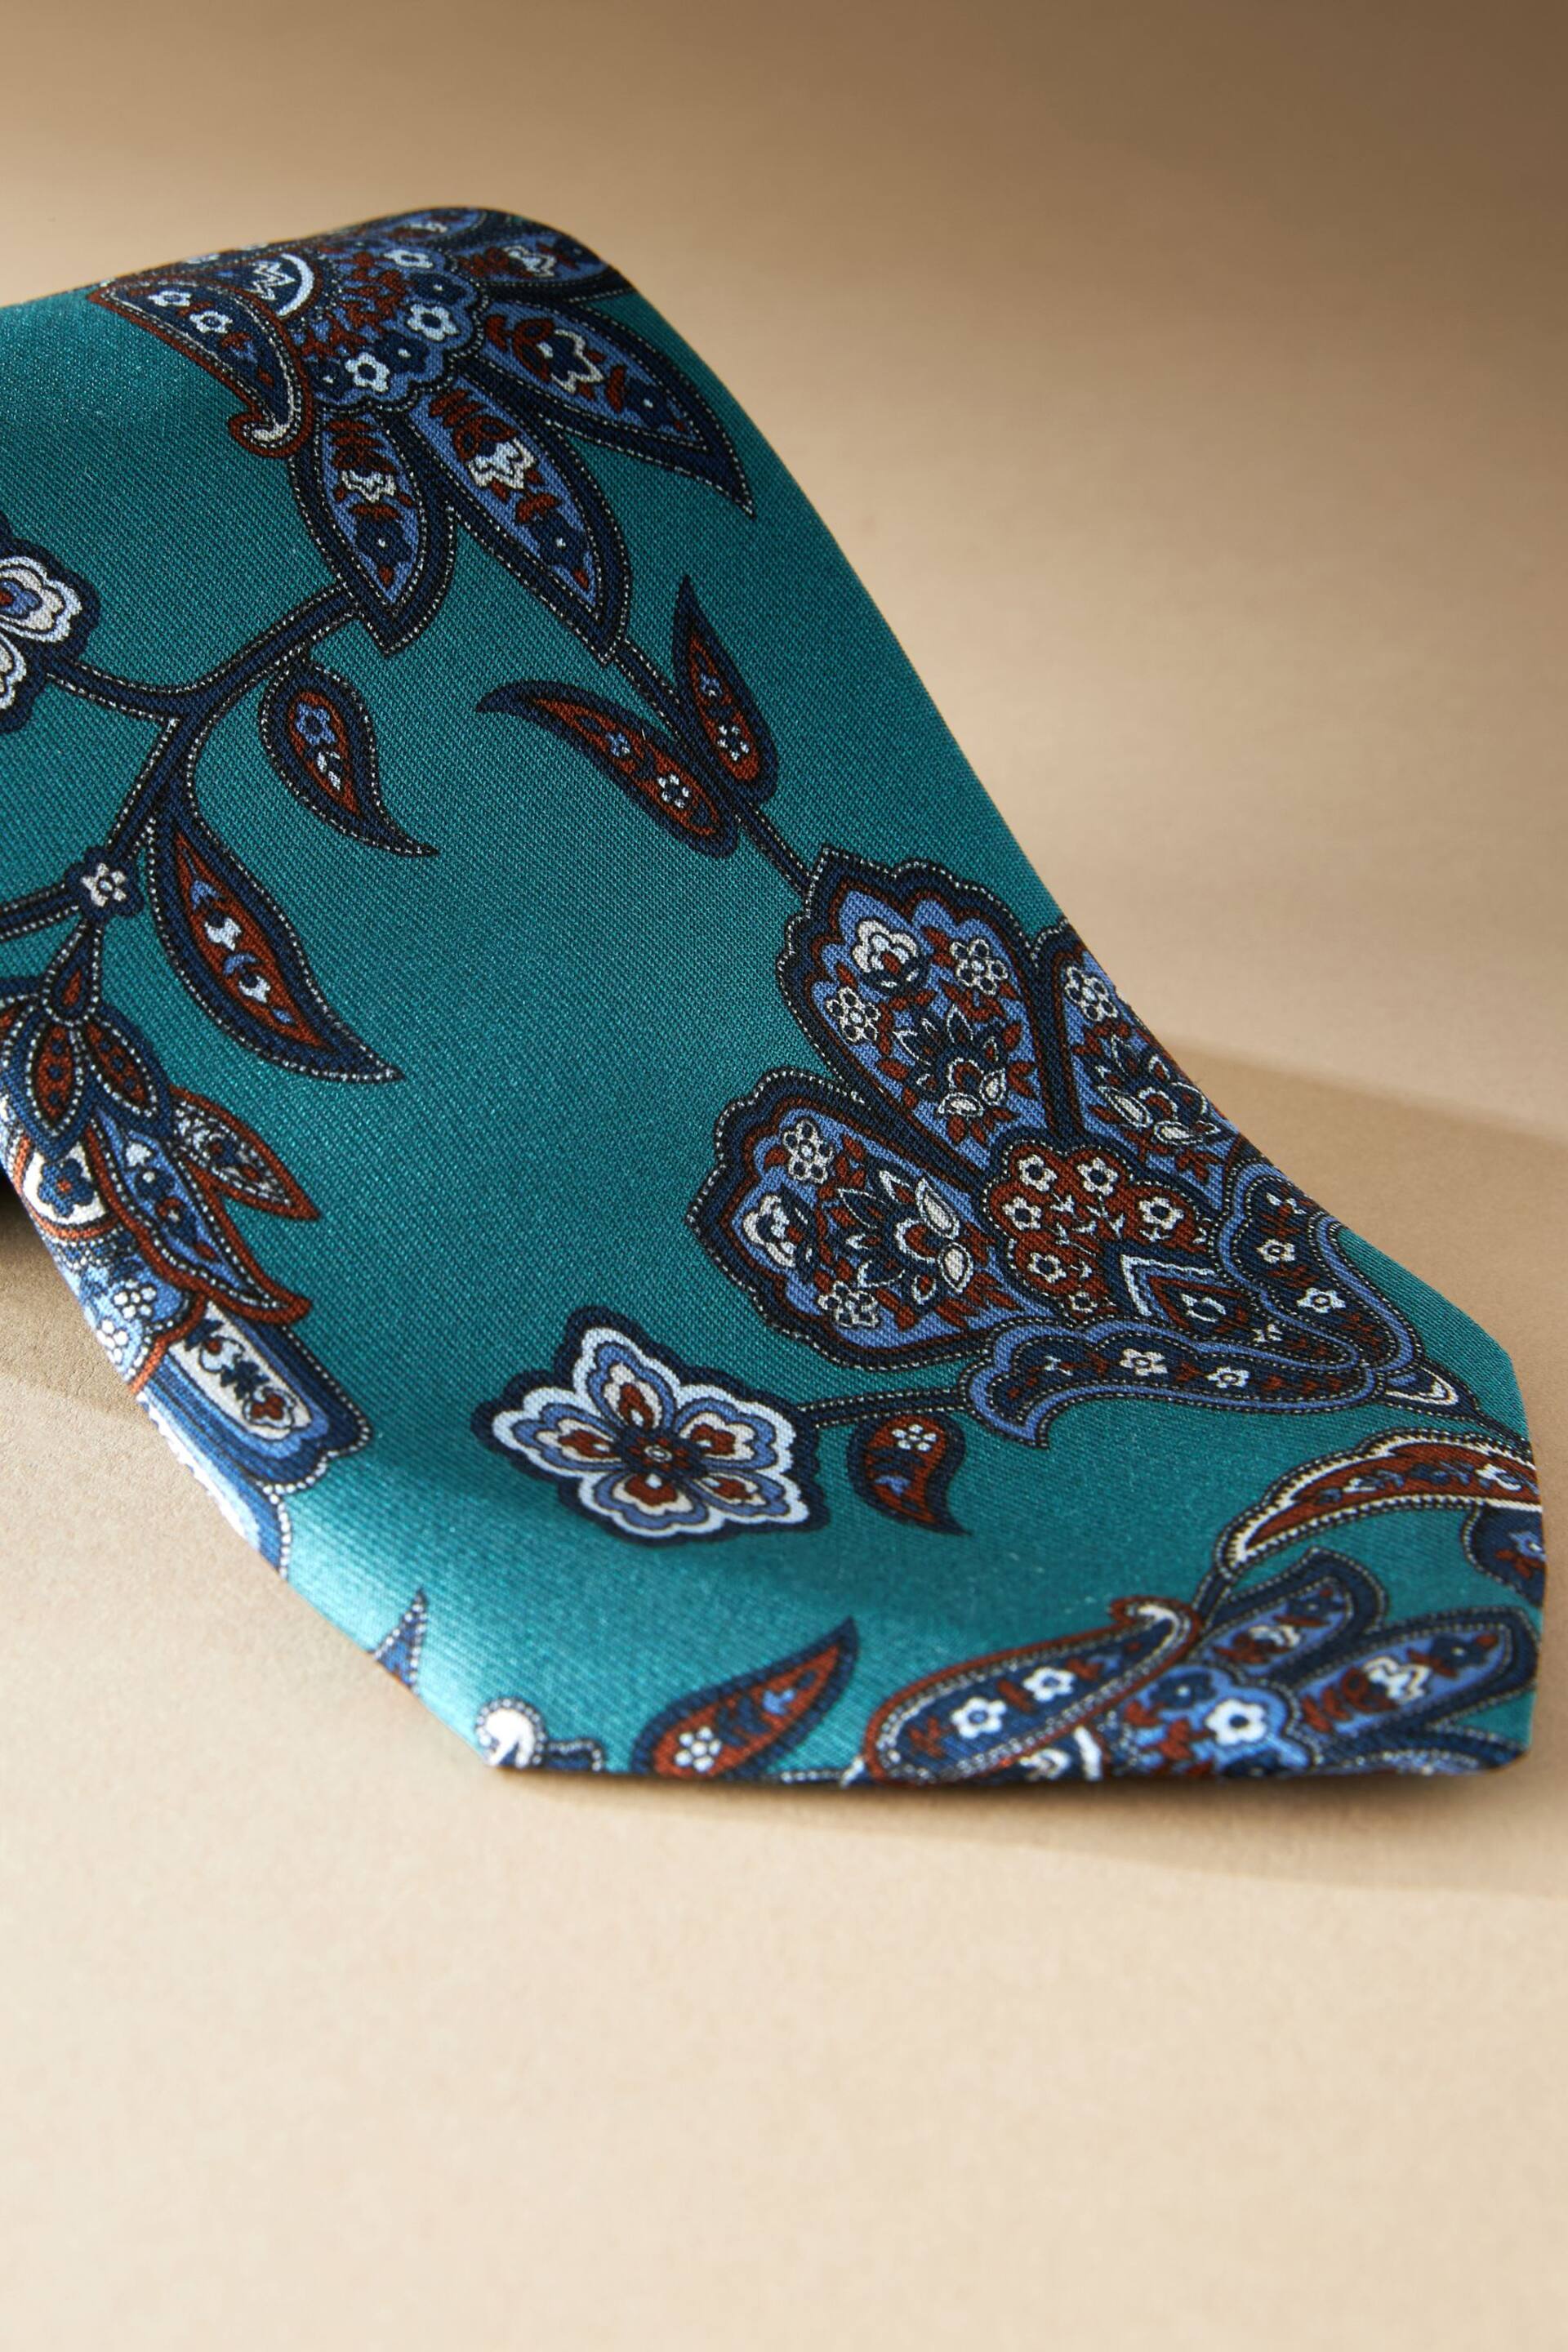 Teal Blue Paisley Signature Made In Italy Design Tie - Image 2 of 3